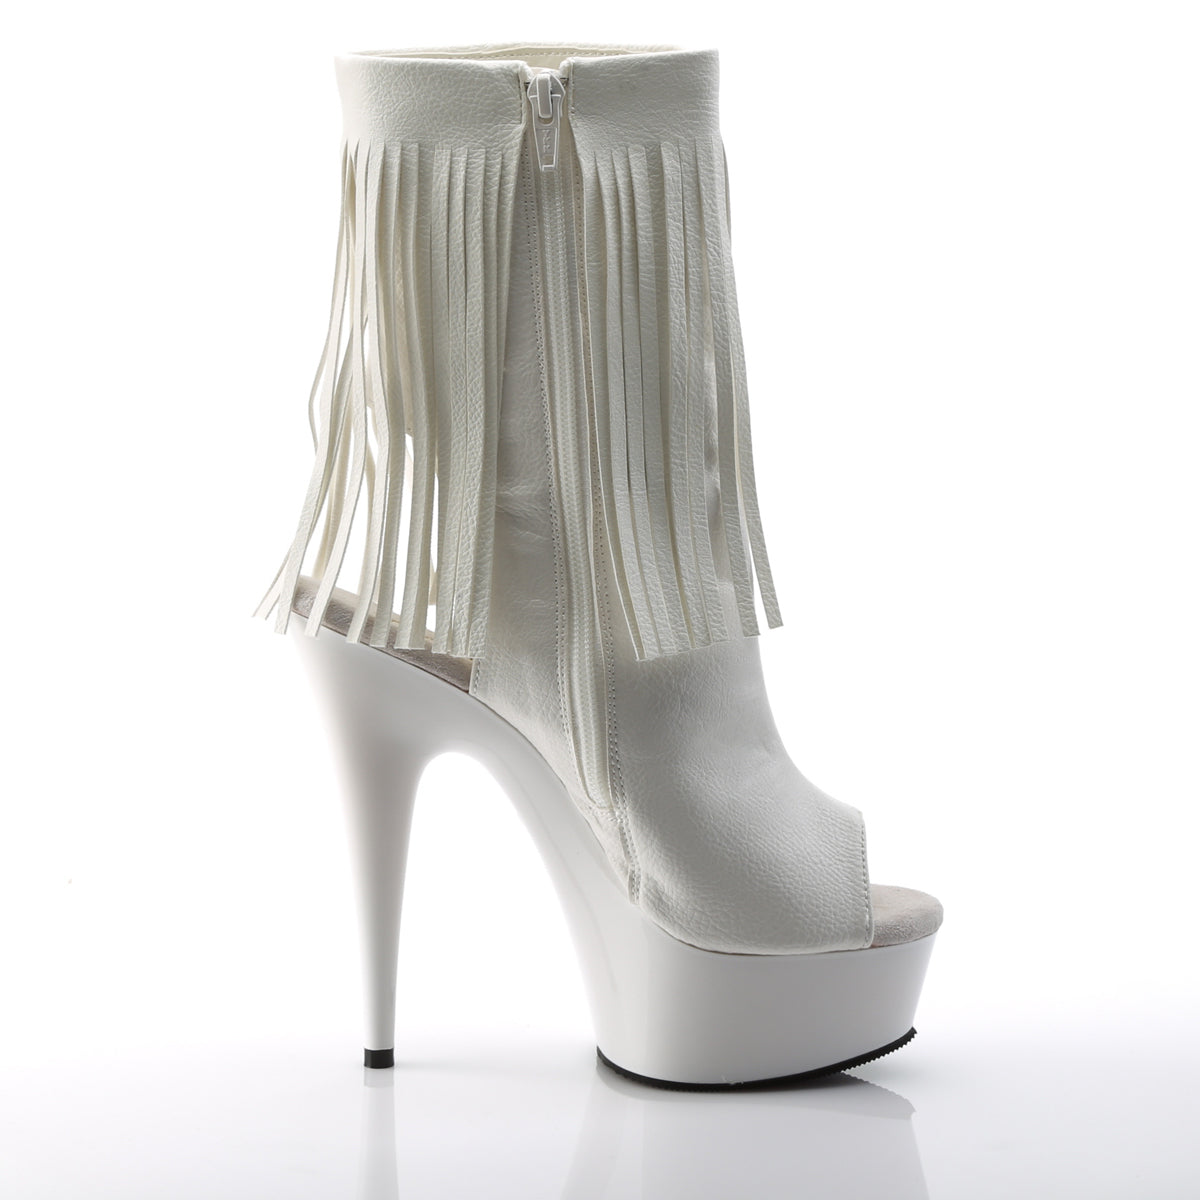 DELIGHT-1019 White Faux Leather/White Boot Pleaser